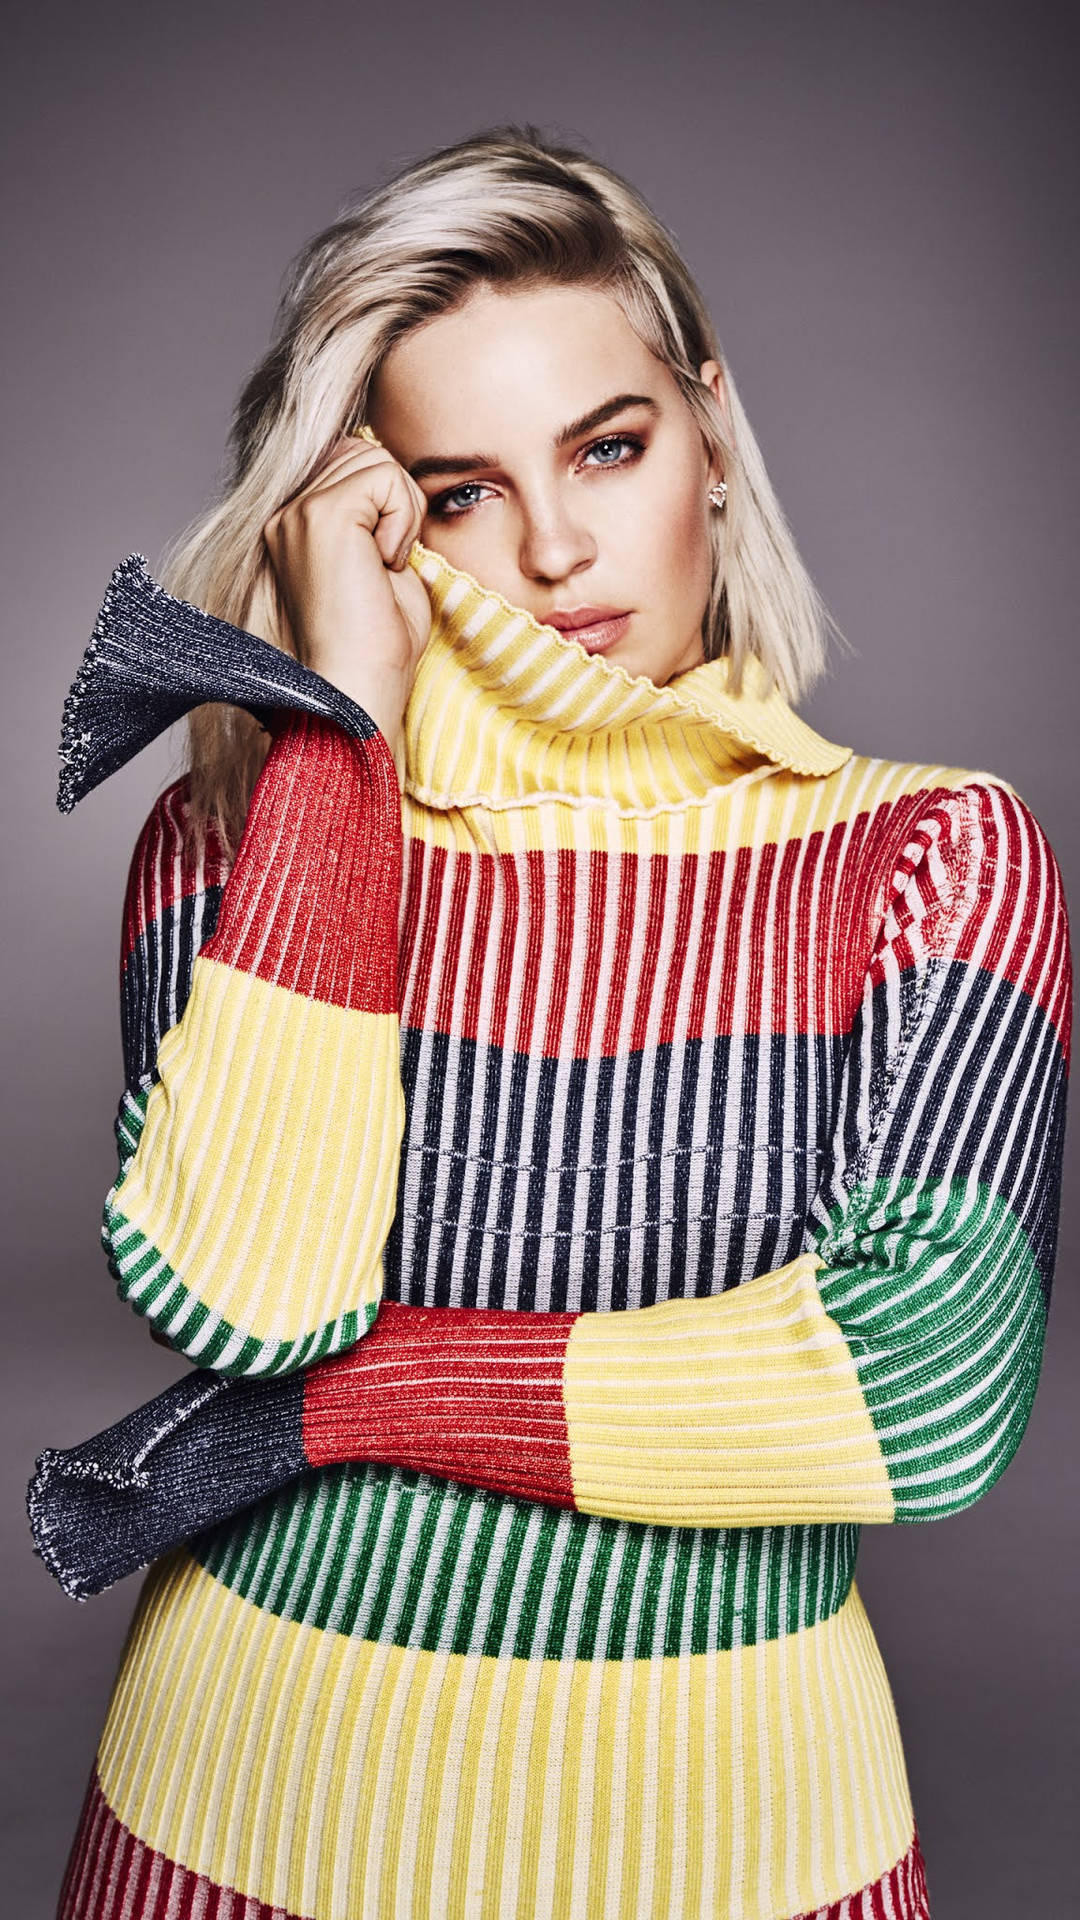 Anne-marie Colorful Sweater Background